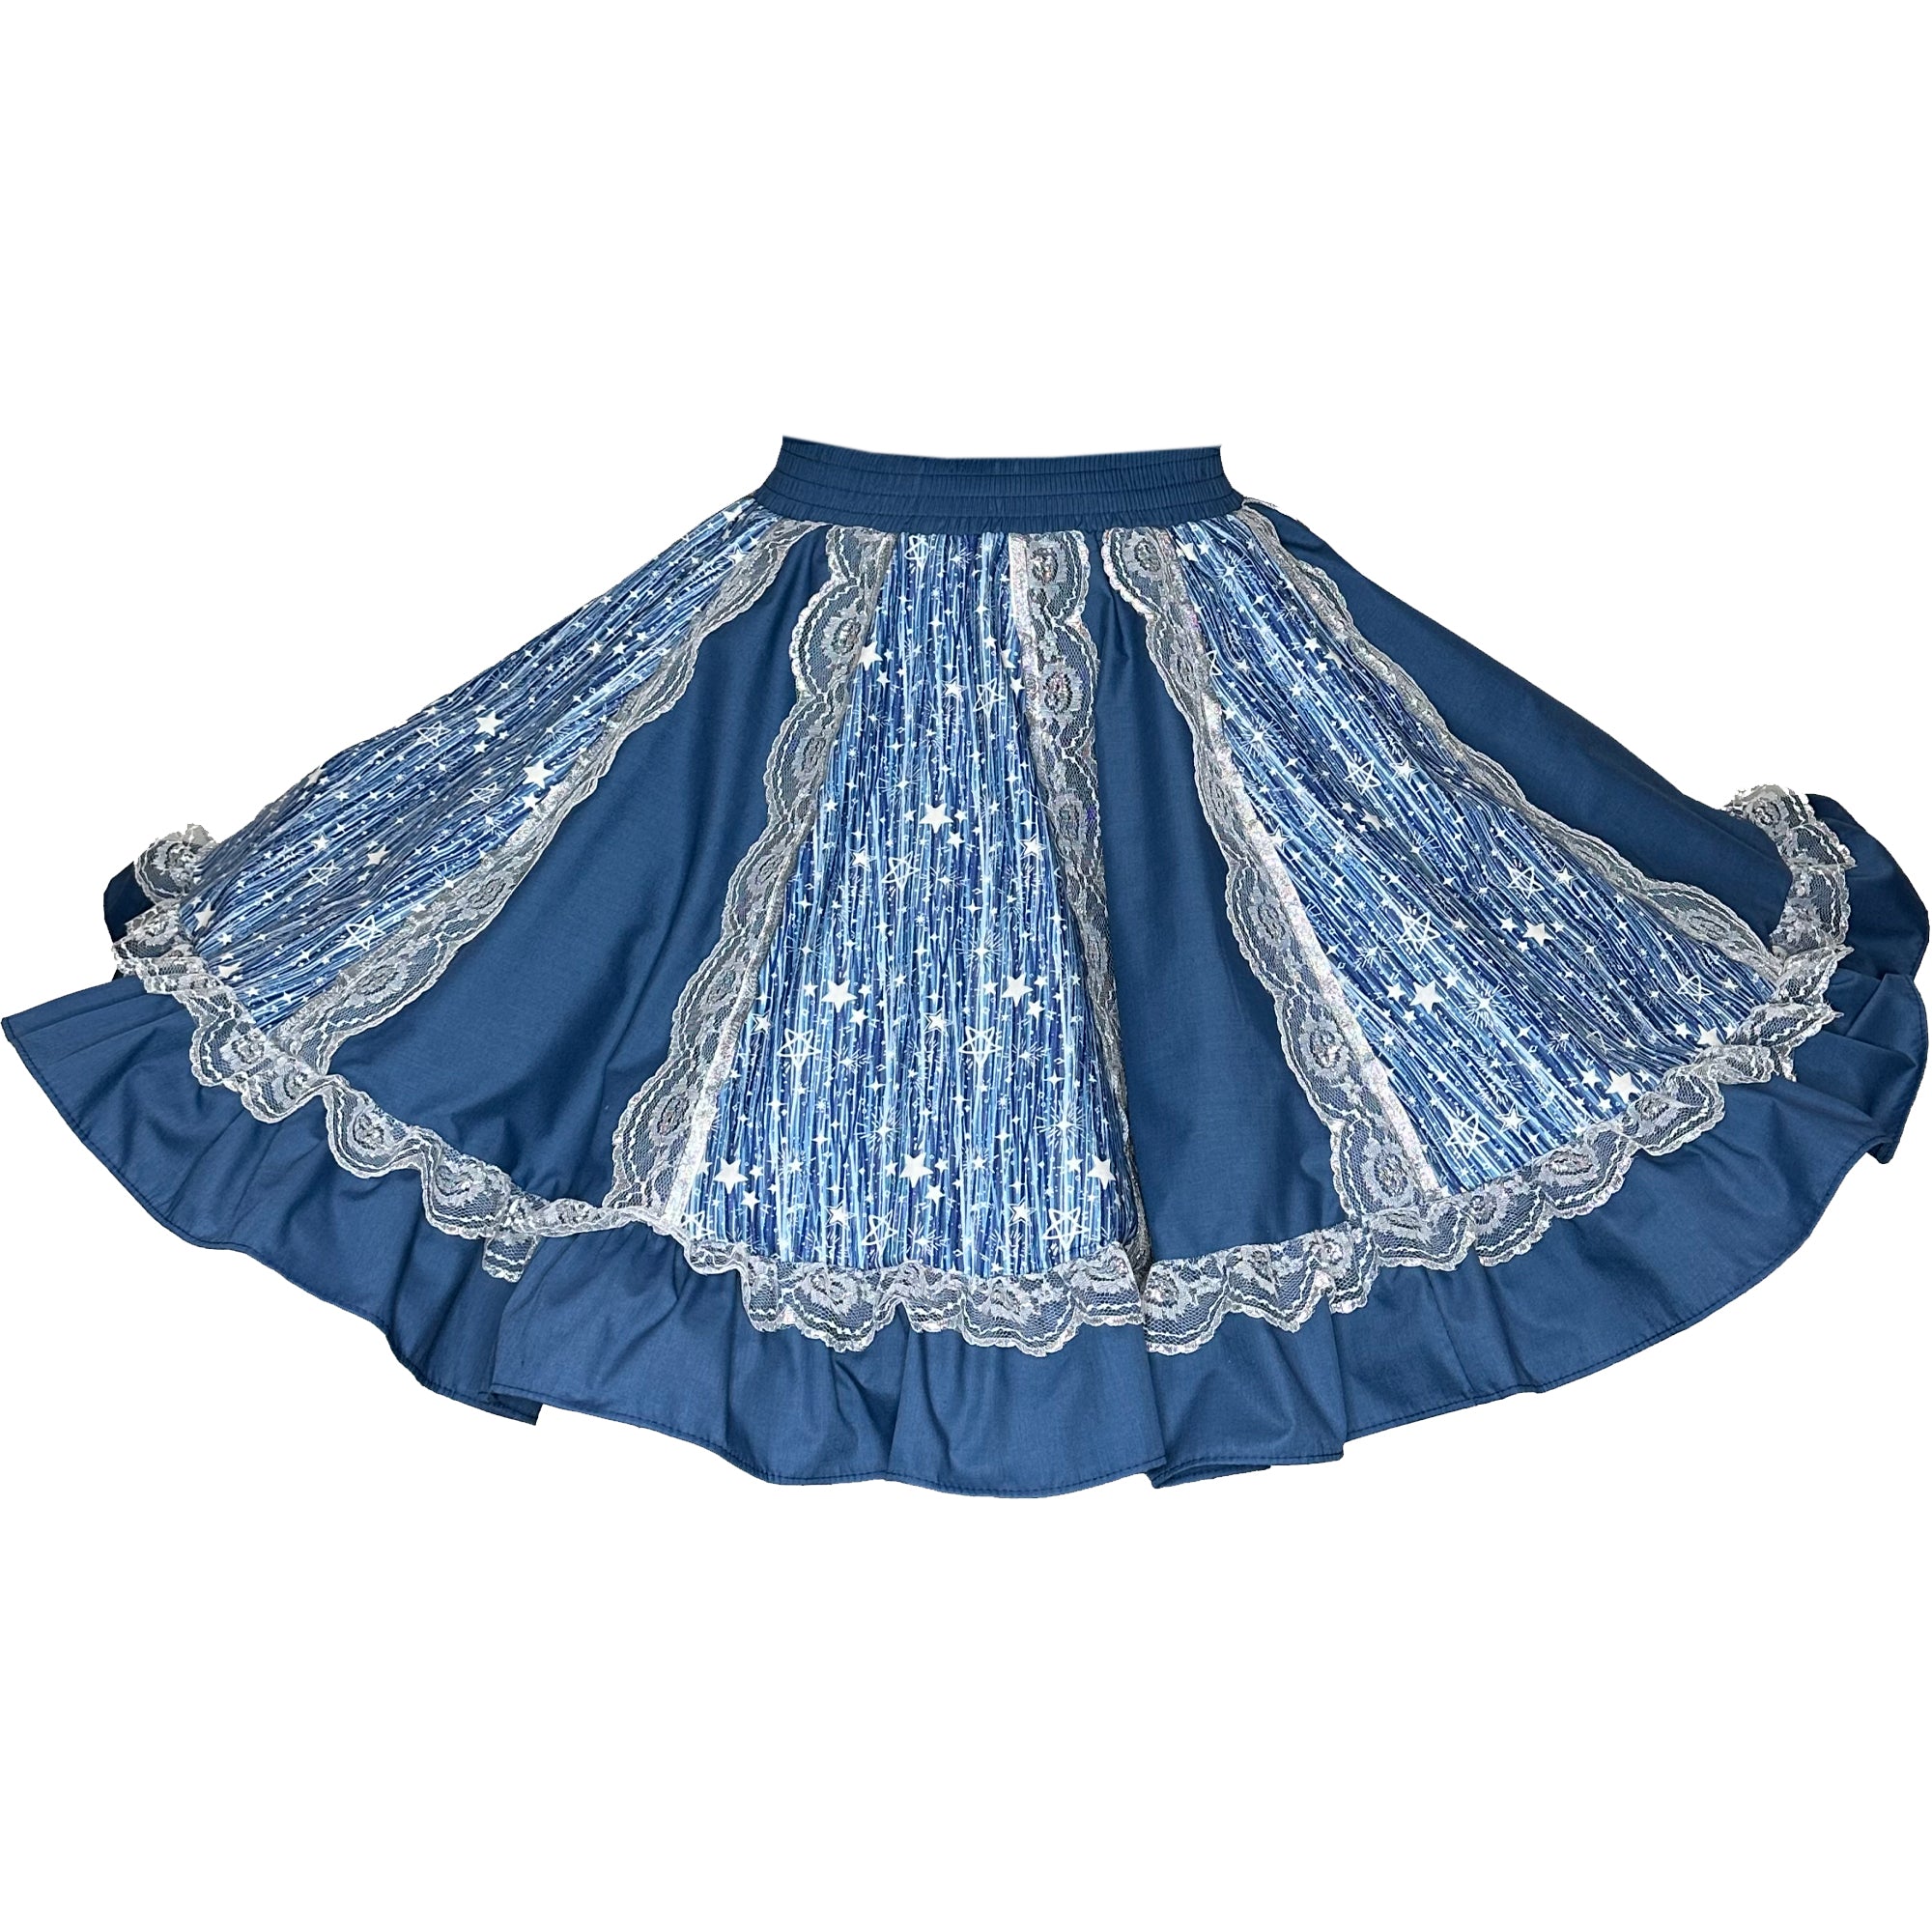 A blue and white Starry Night Fancy Square Dance Skirt with stars on a printed fabric by Square Up Fashions.